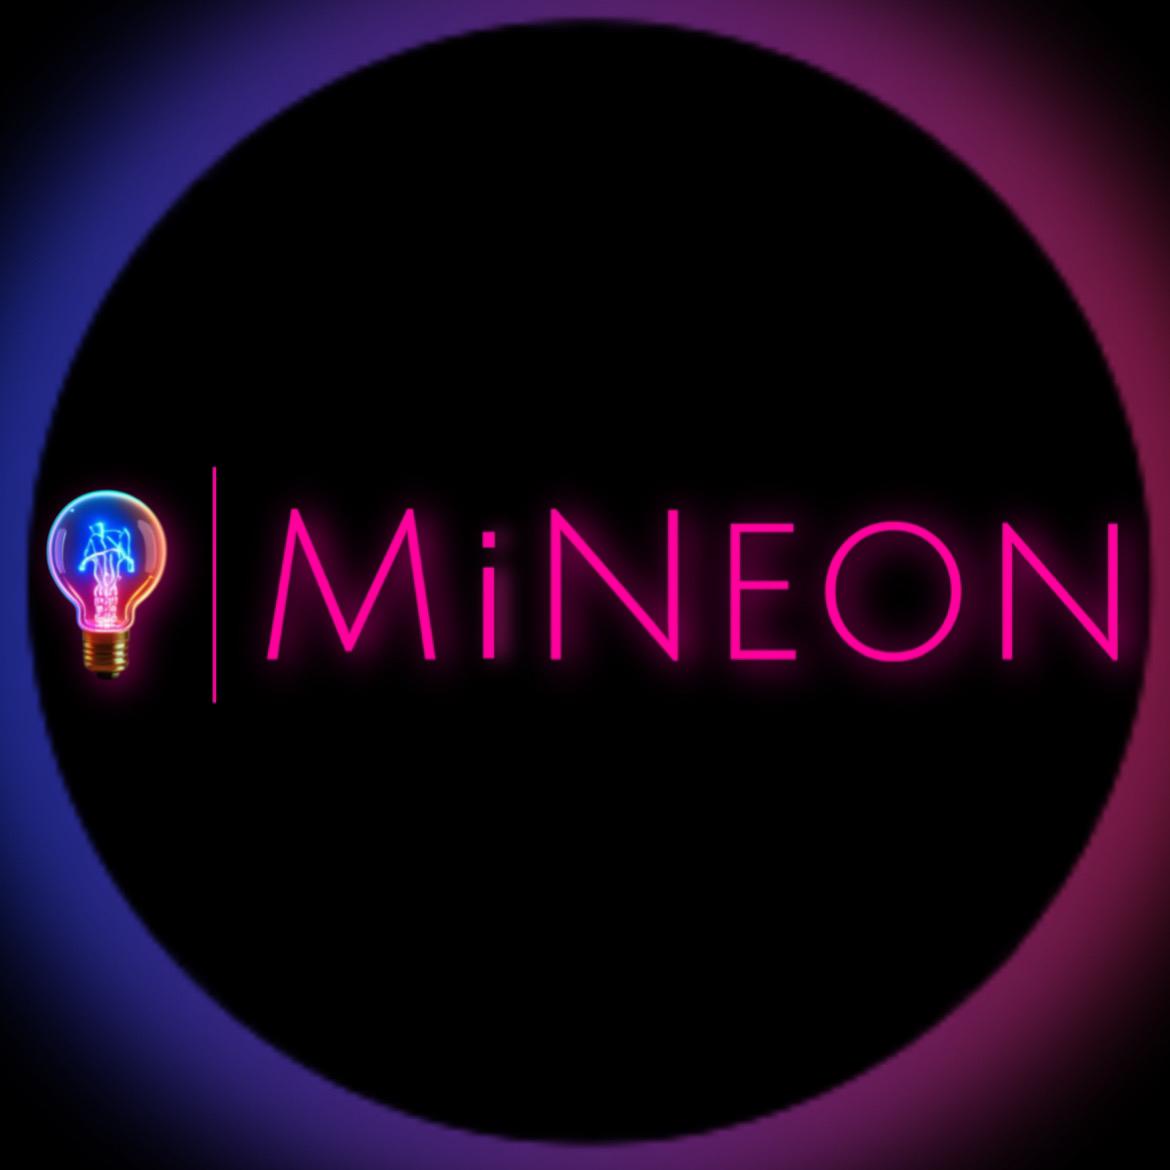 MiNEON's images